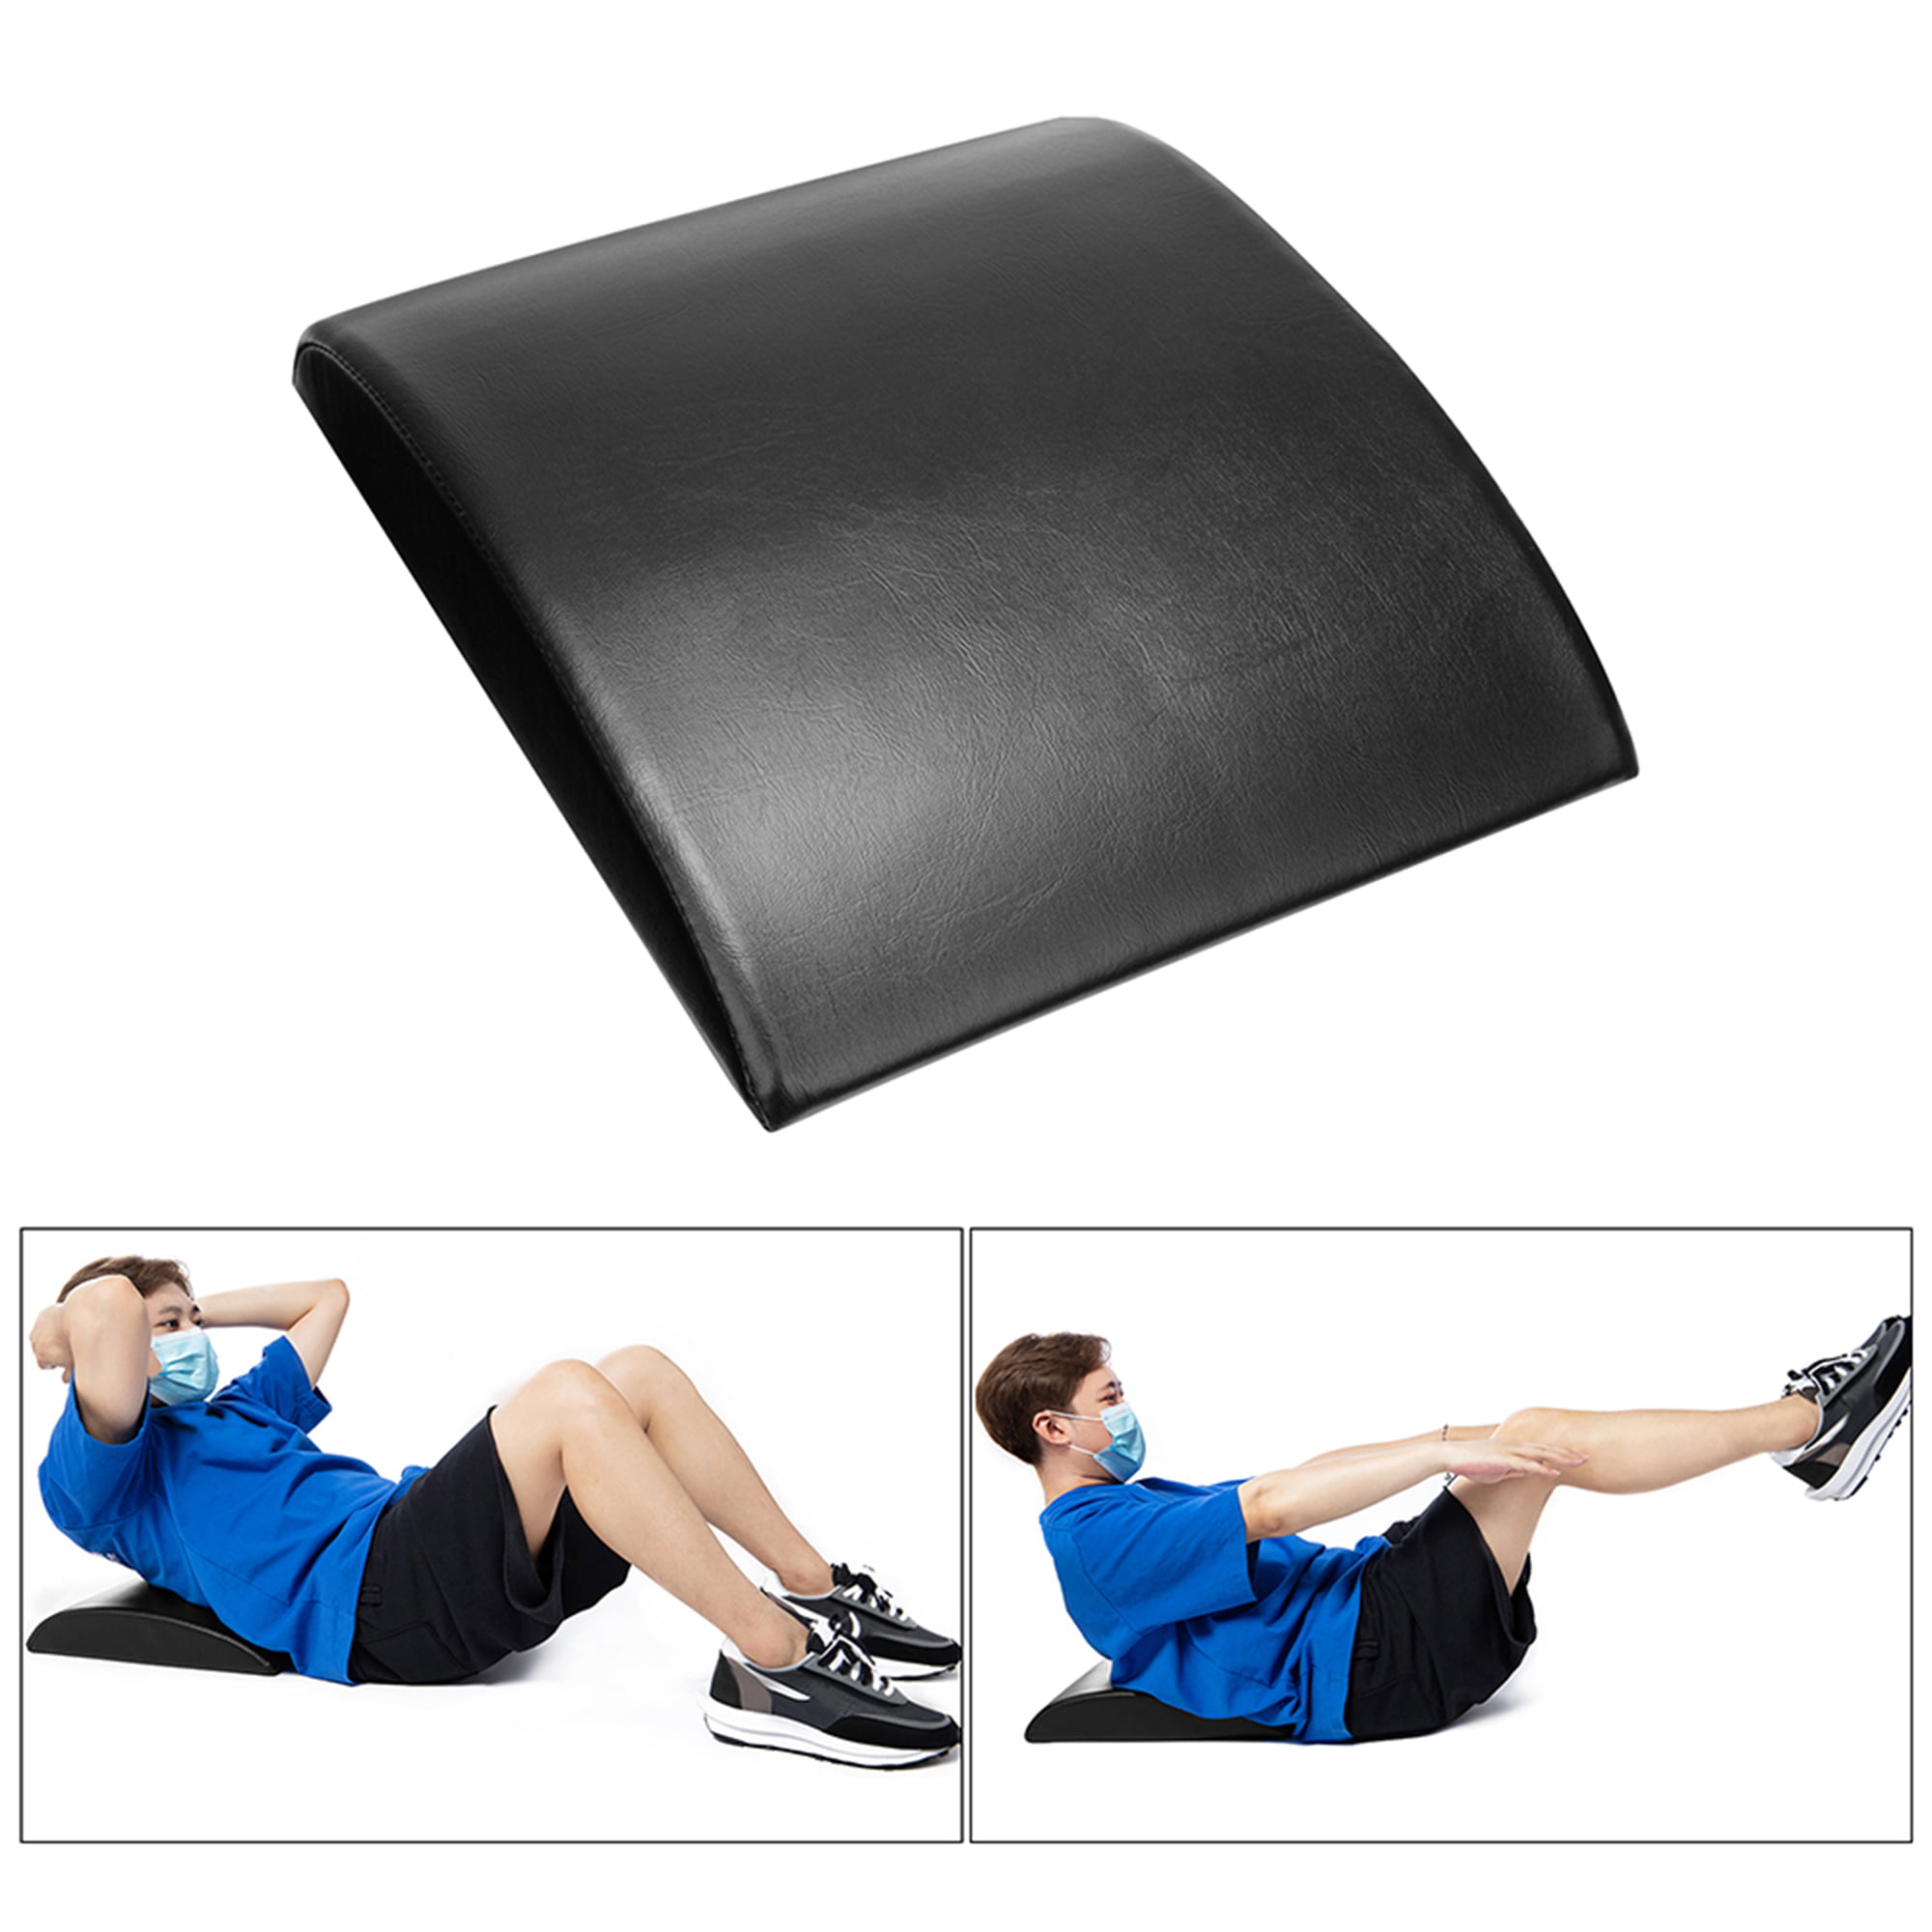 POWER GUIDANCE Ab Mat Core Abdominal Exercise Trainer For Cross Sit Up Training